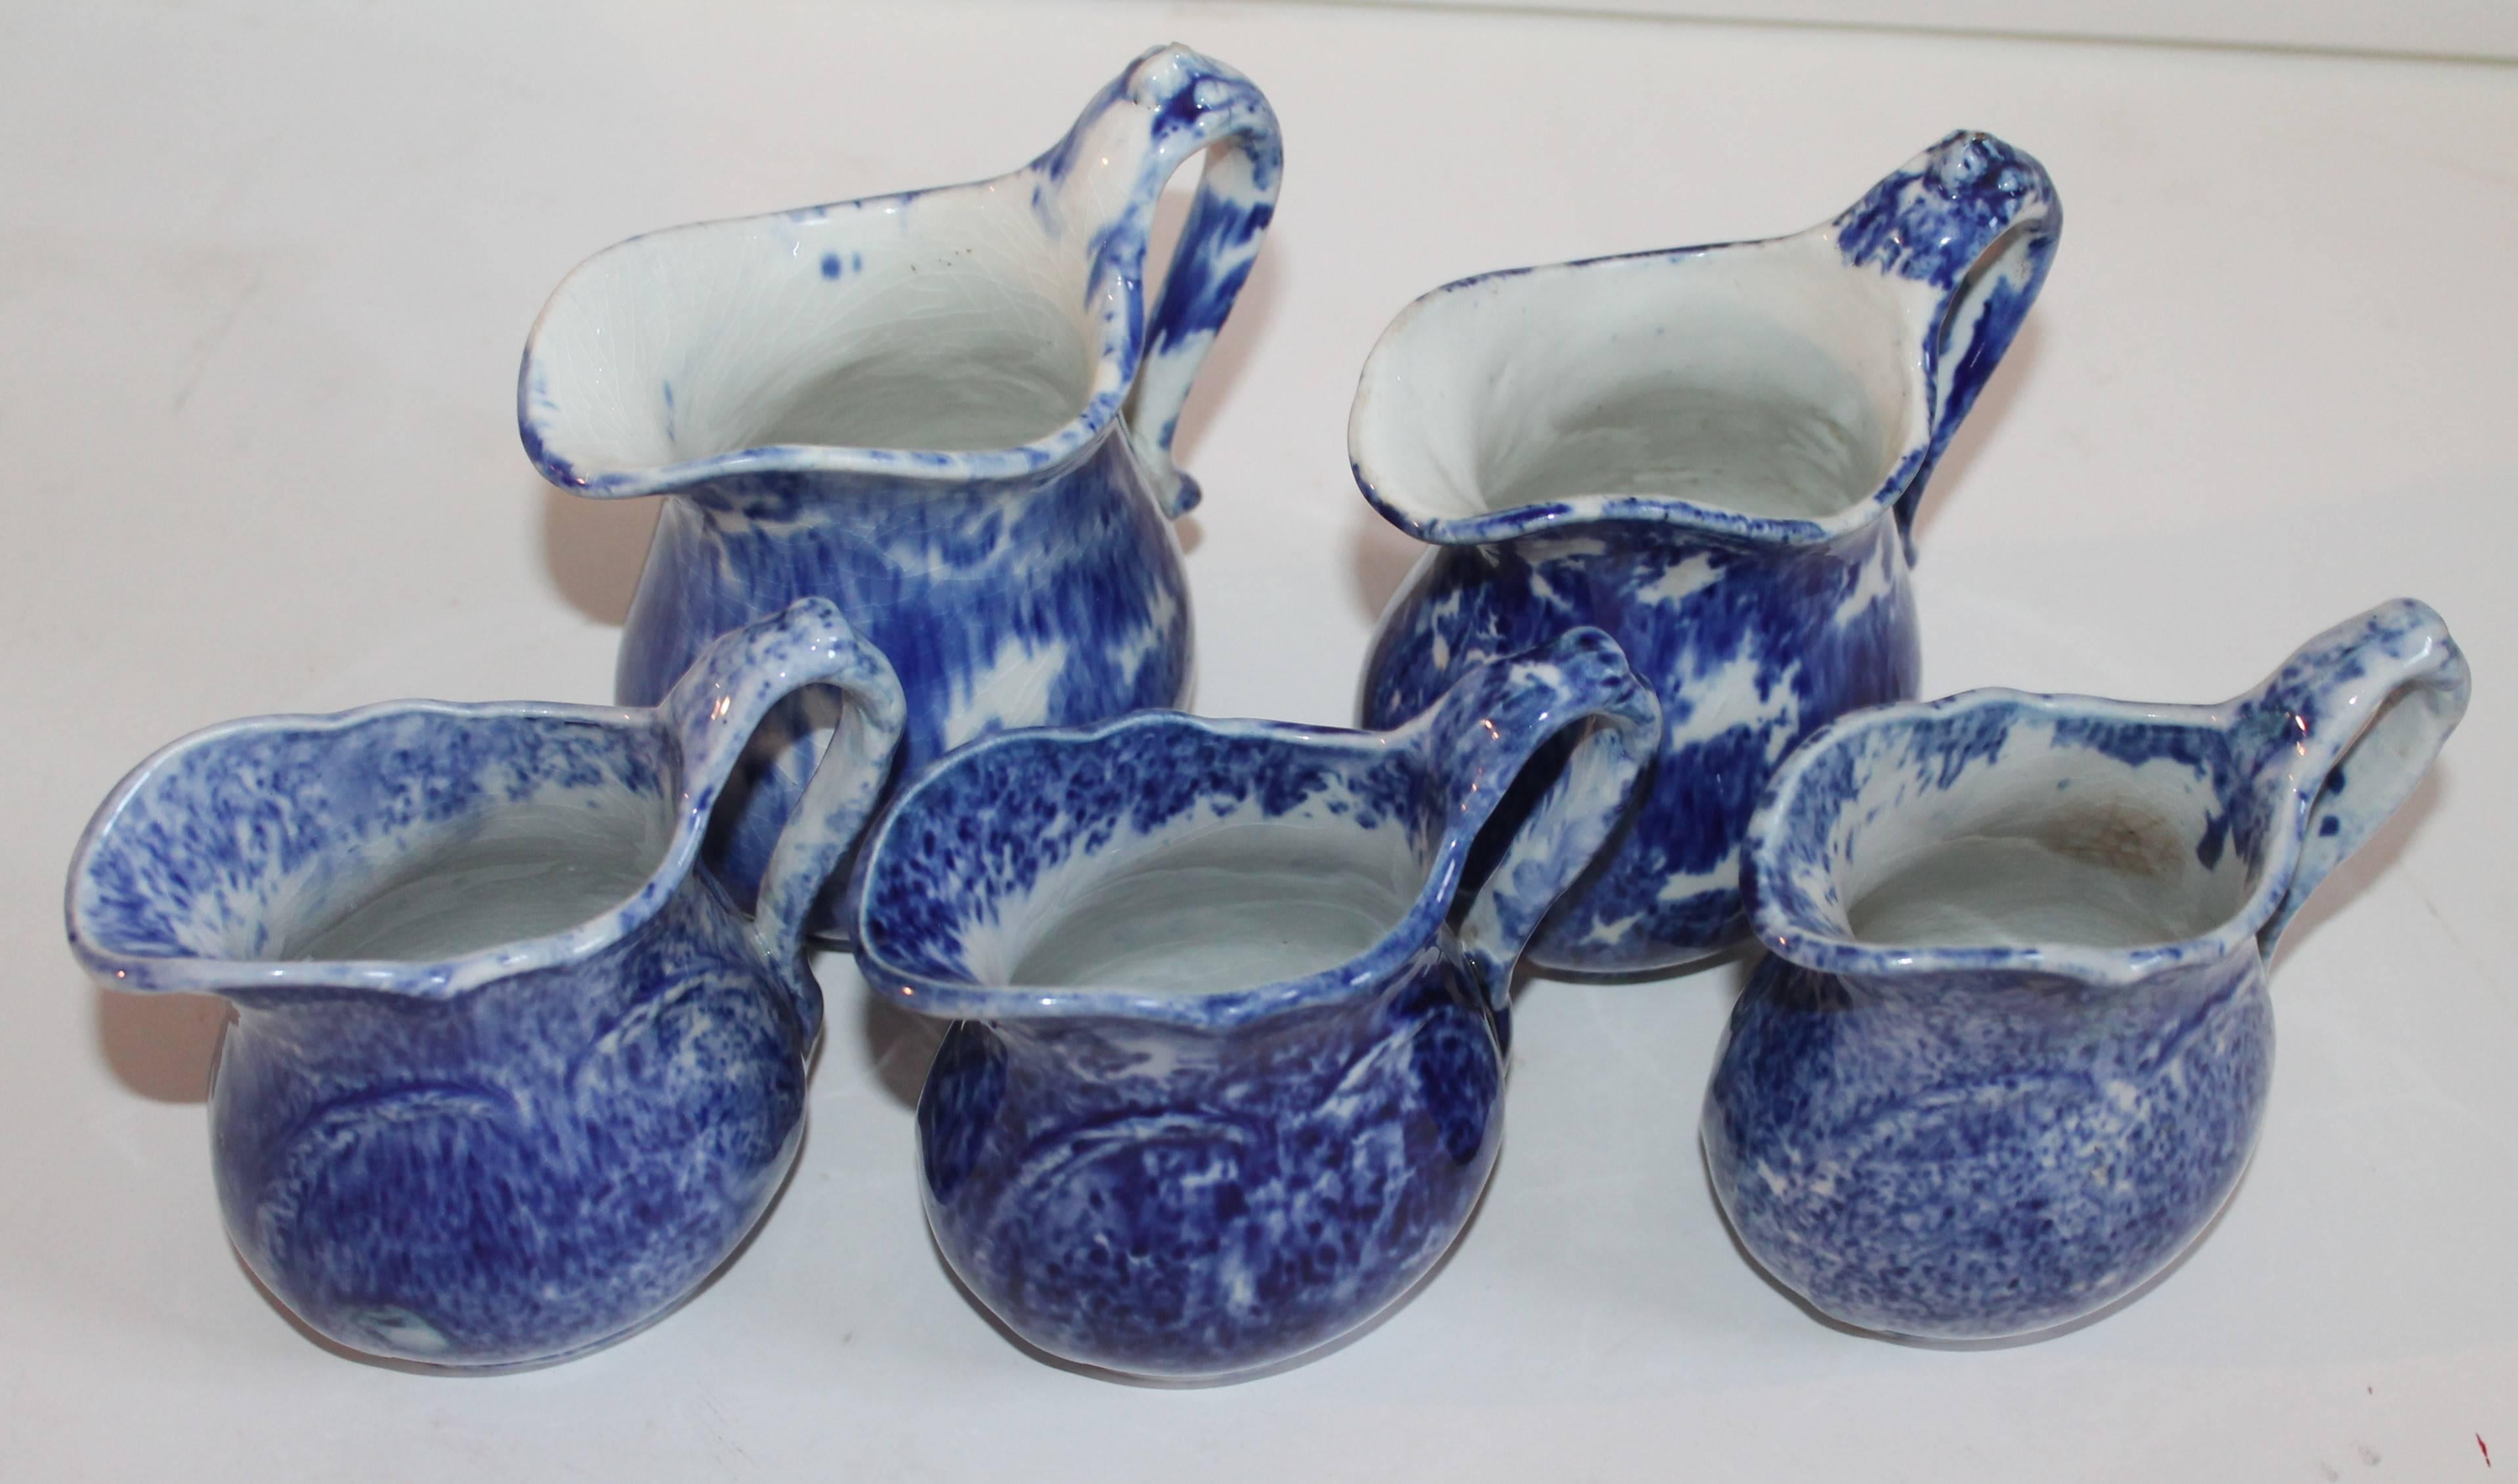 Hand-Crafted Collection of Five 19th Century Sponge Ware Mini Cream Pitchers